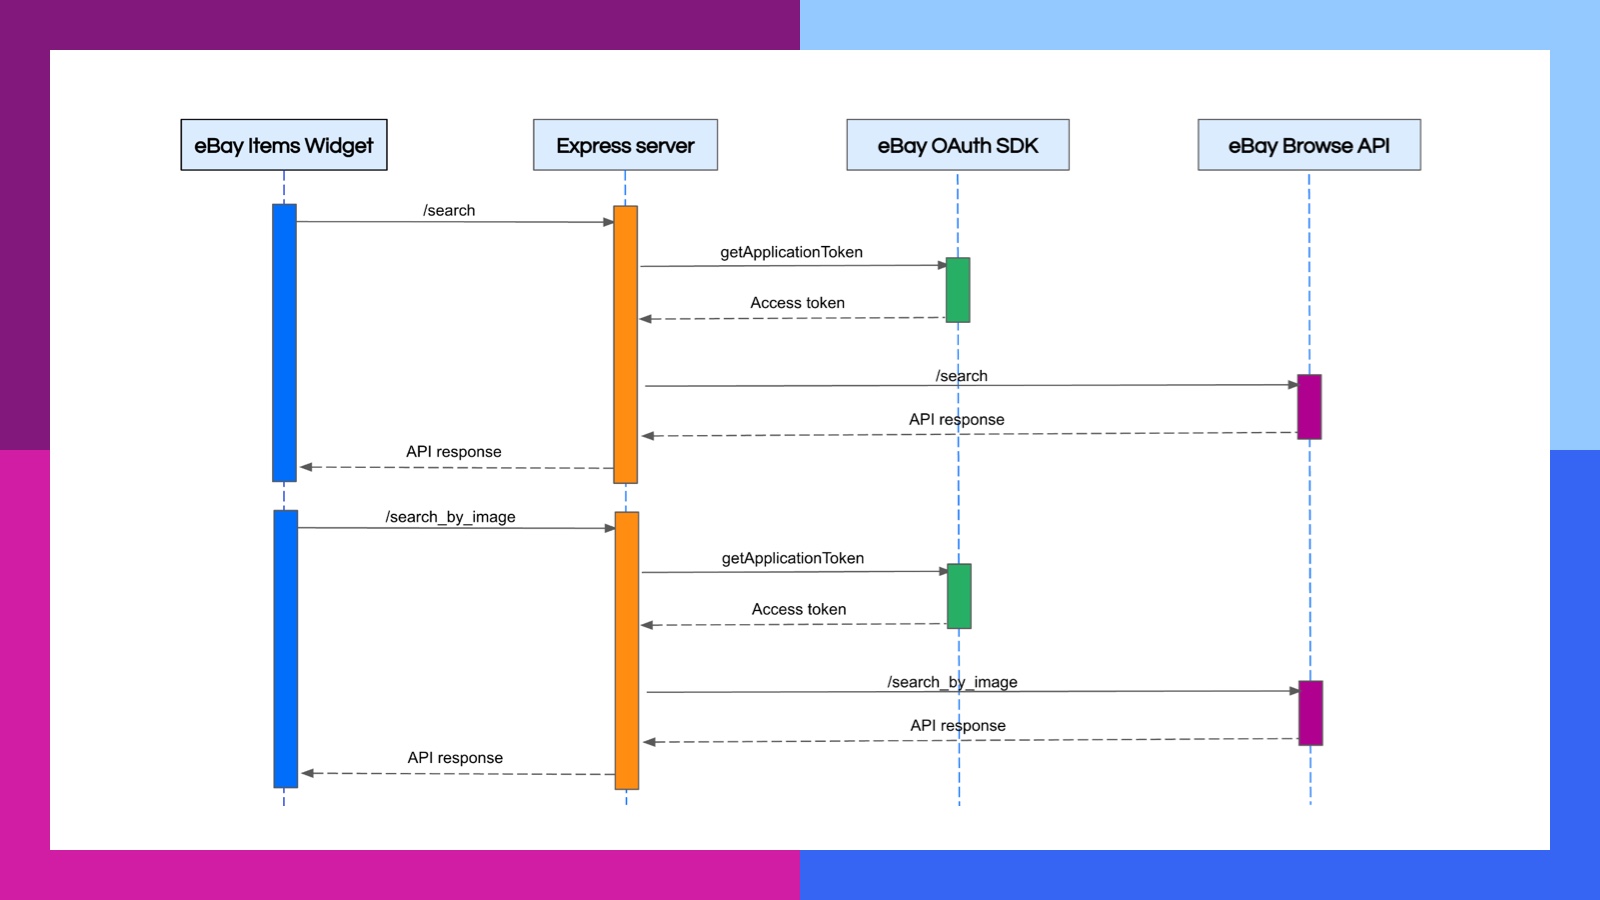 Diagram demonstrating how the eBay Items Widget works with the express server eBay OAuth SDK and eBay Browse API